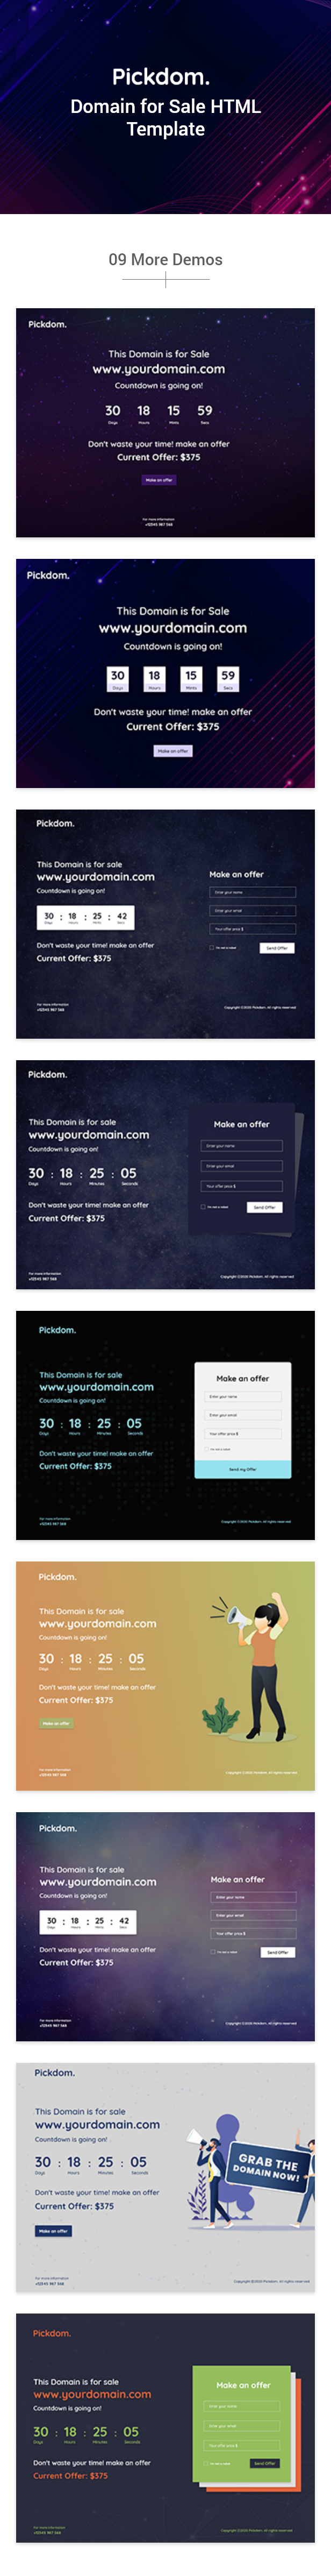 Pickdom - Domain for Sale HTML Template - 1